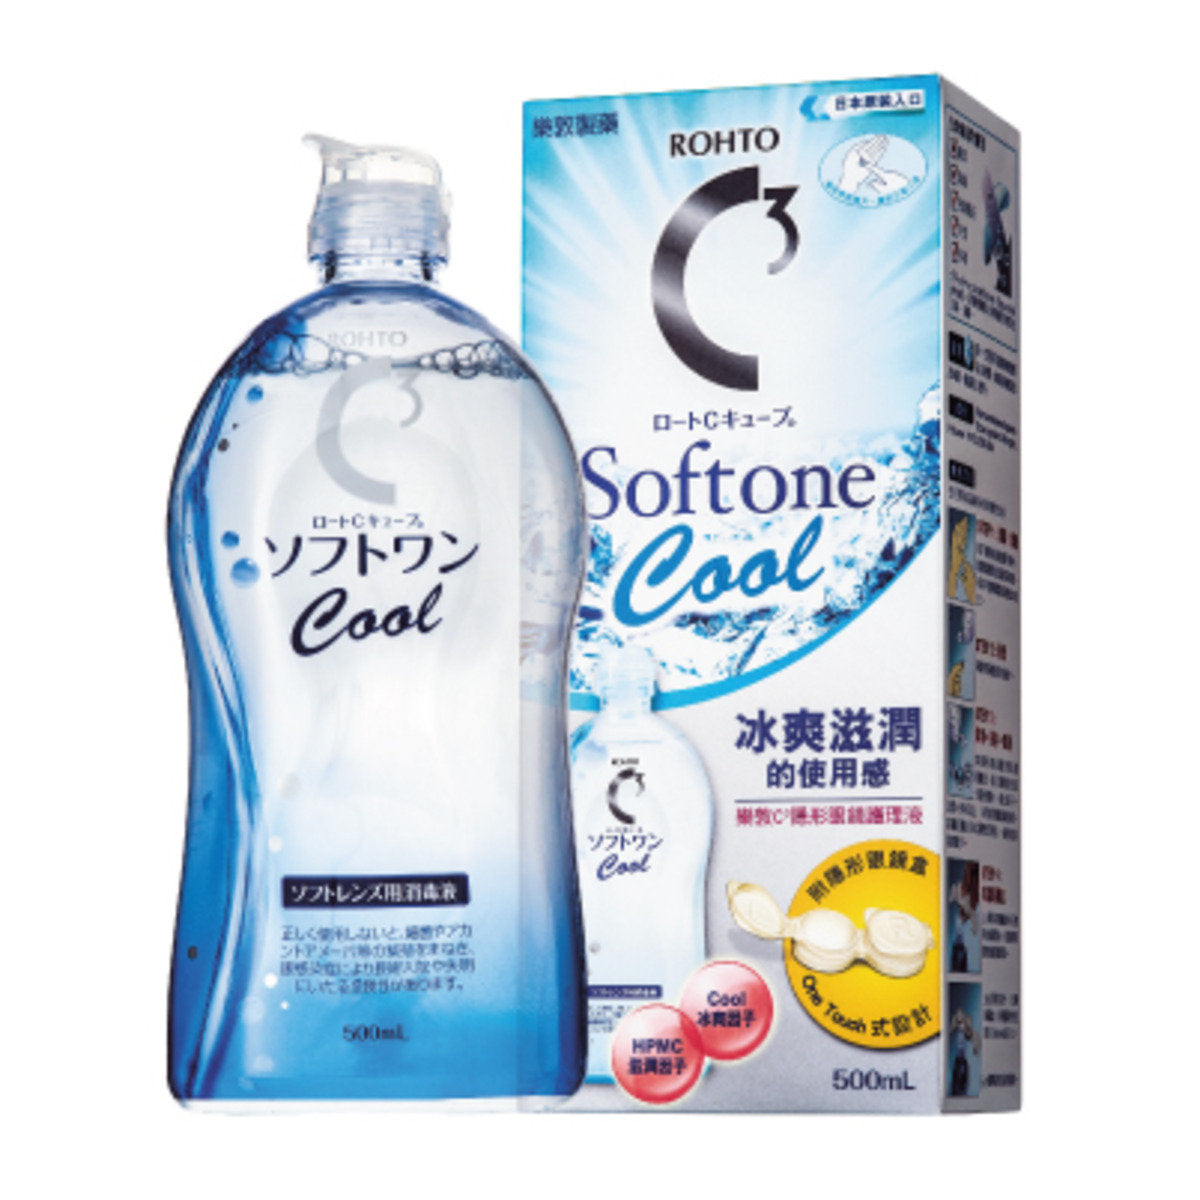 RHOTO C3 Softone Cool Contact Lens Care Solution 500ml